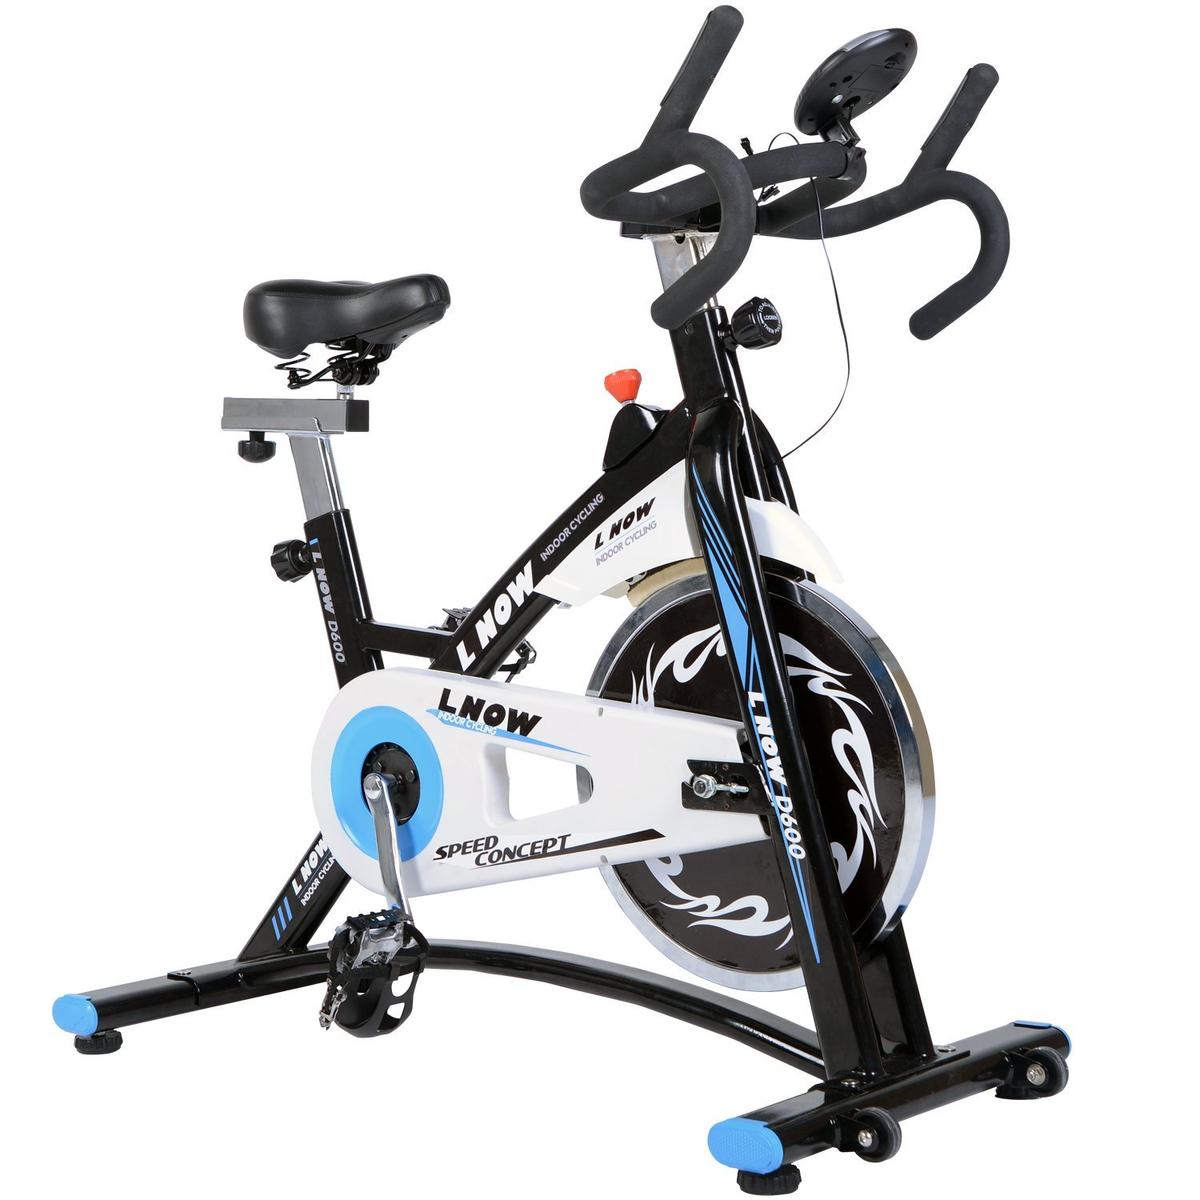 L Now Indoor Cycling Bike Smooth Belt Driven. $424 MSRP